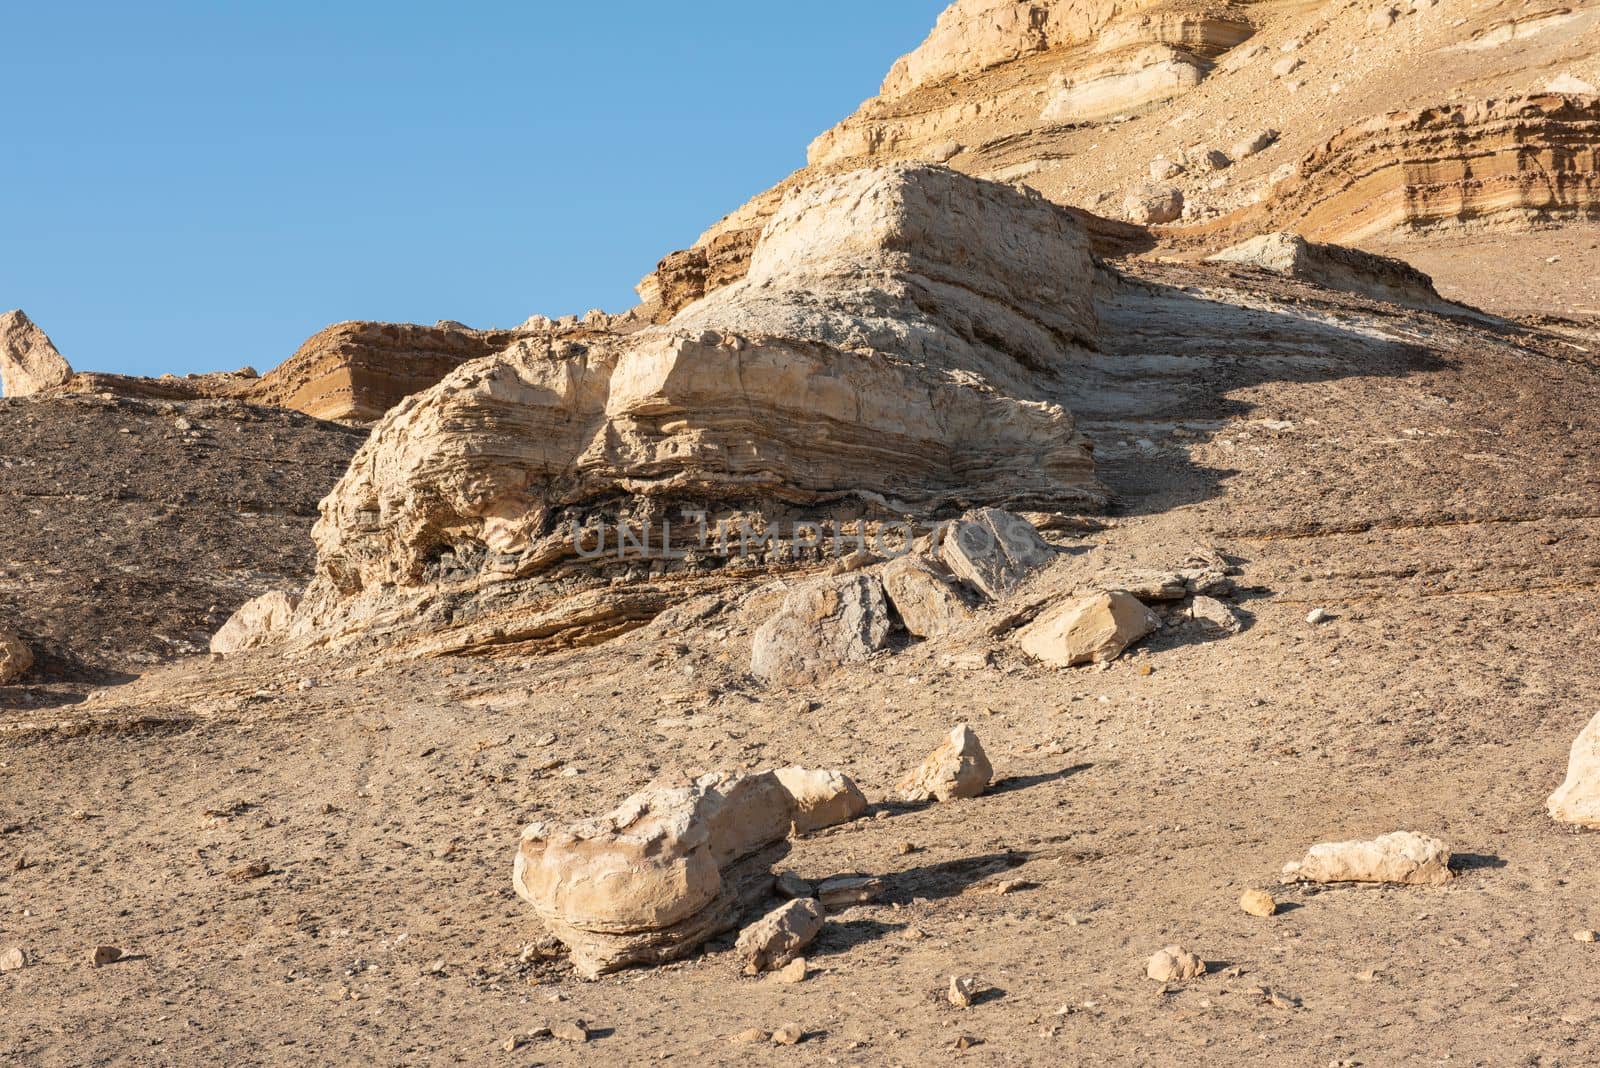 Rocky slope landscape in an arid desert environment with large pyramid mountain at top